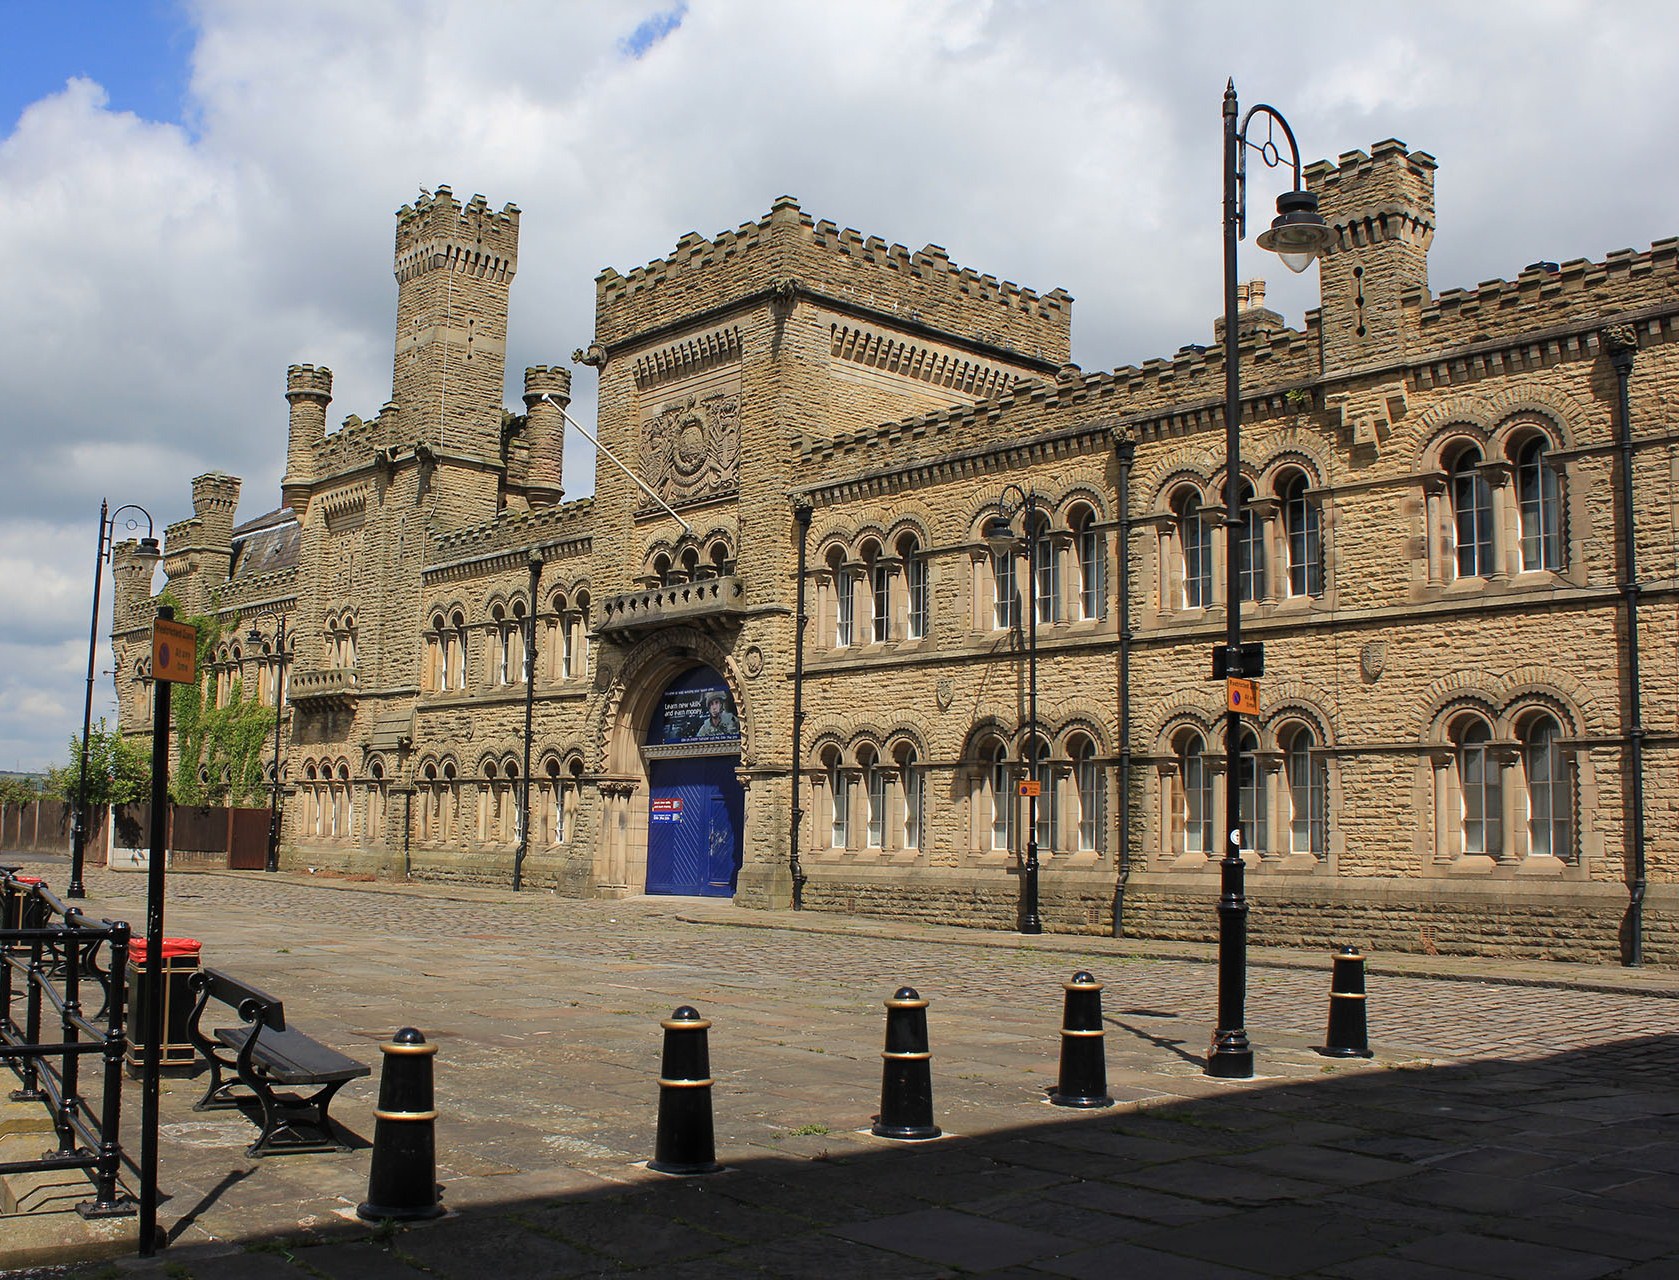 Bury, Castle Street, Drill Hall, 1868, its impressive stone–faced, gothic style frontage with crenulations was designed by Henry Styan and James Farrier, it is Grade II listed.